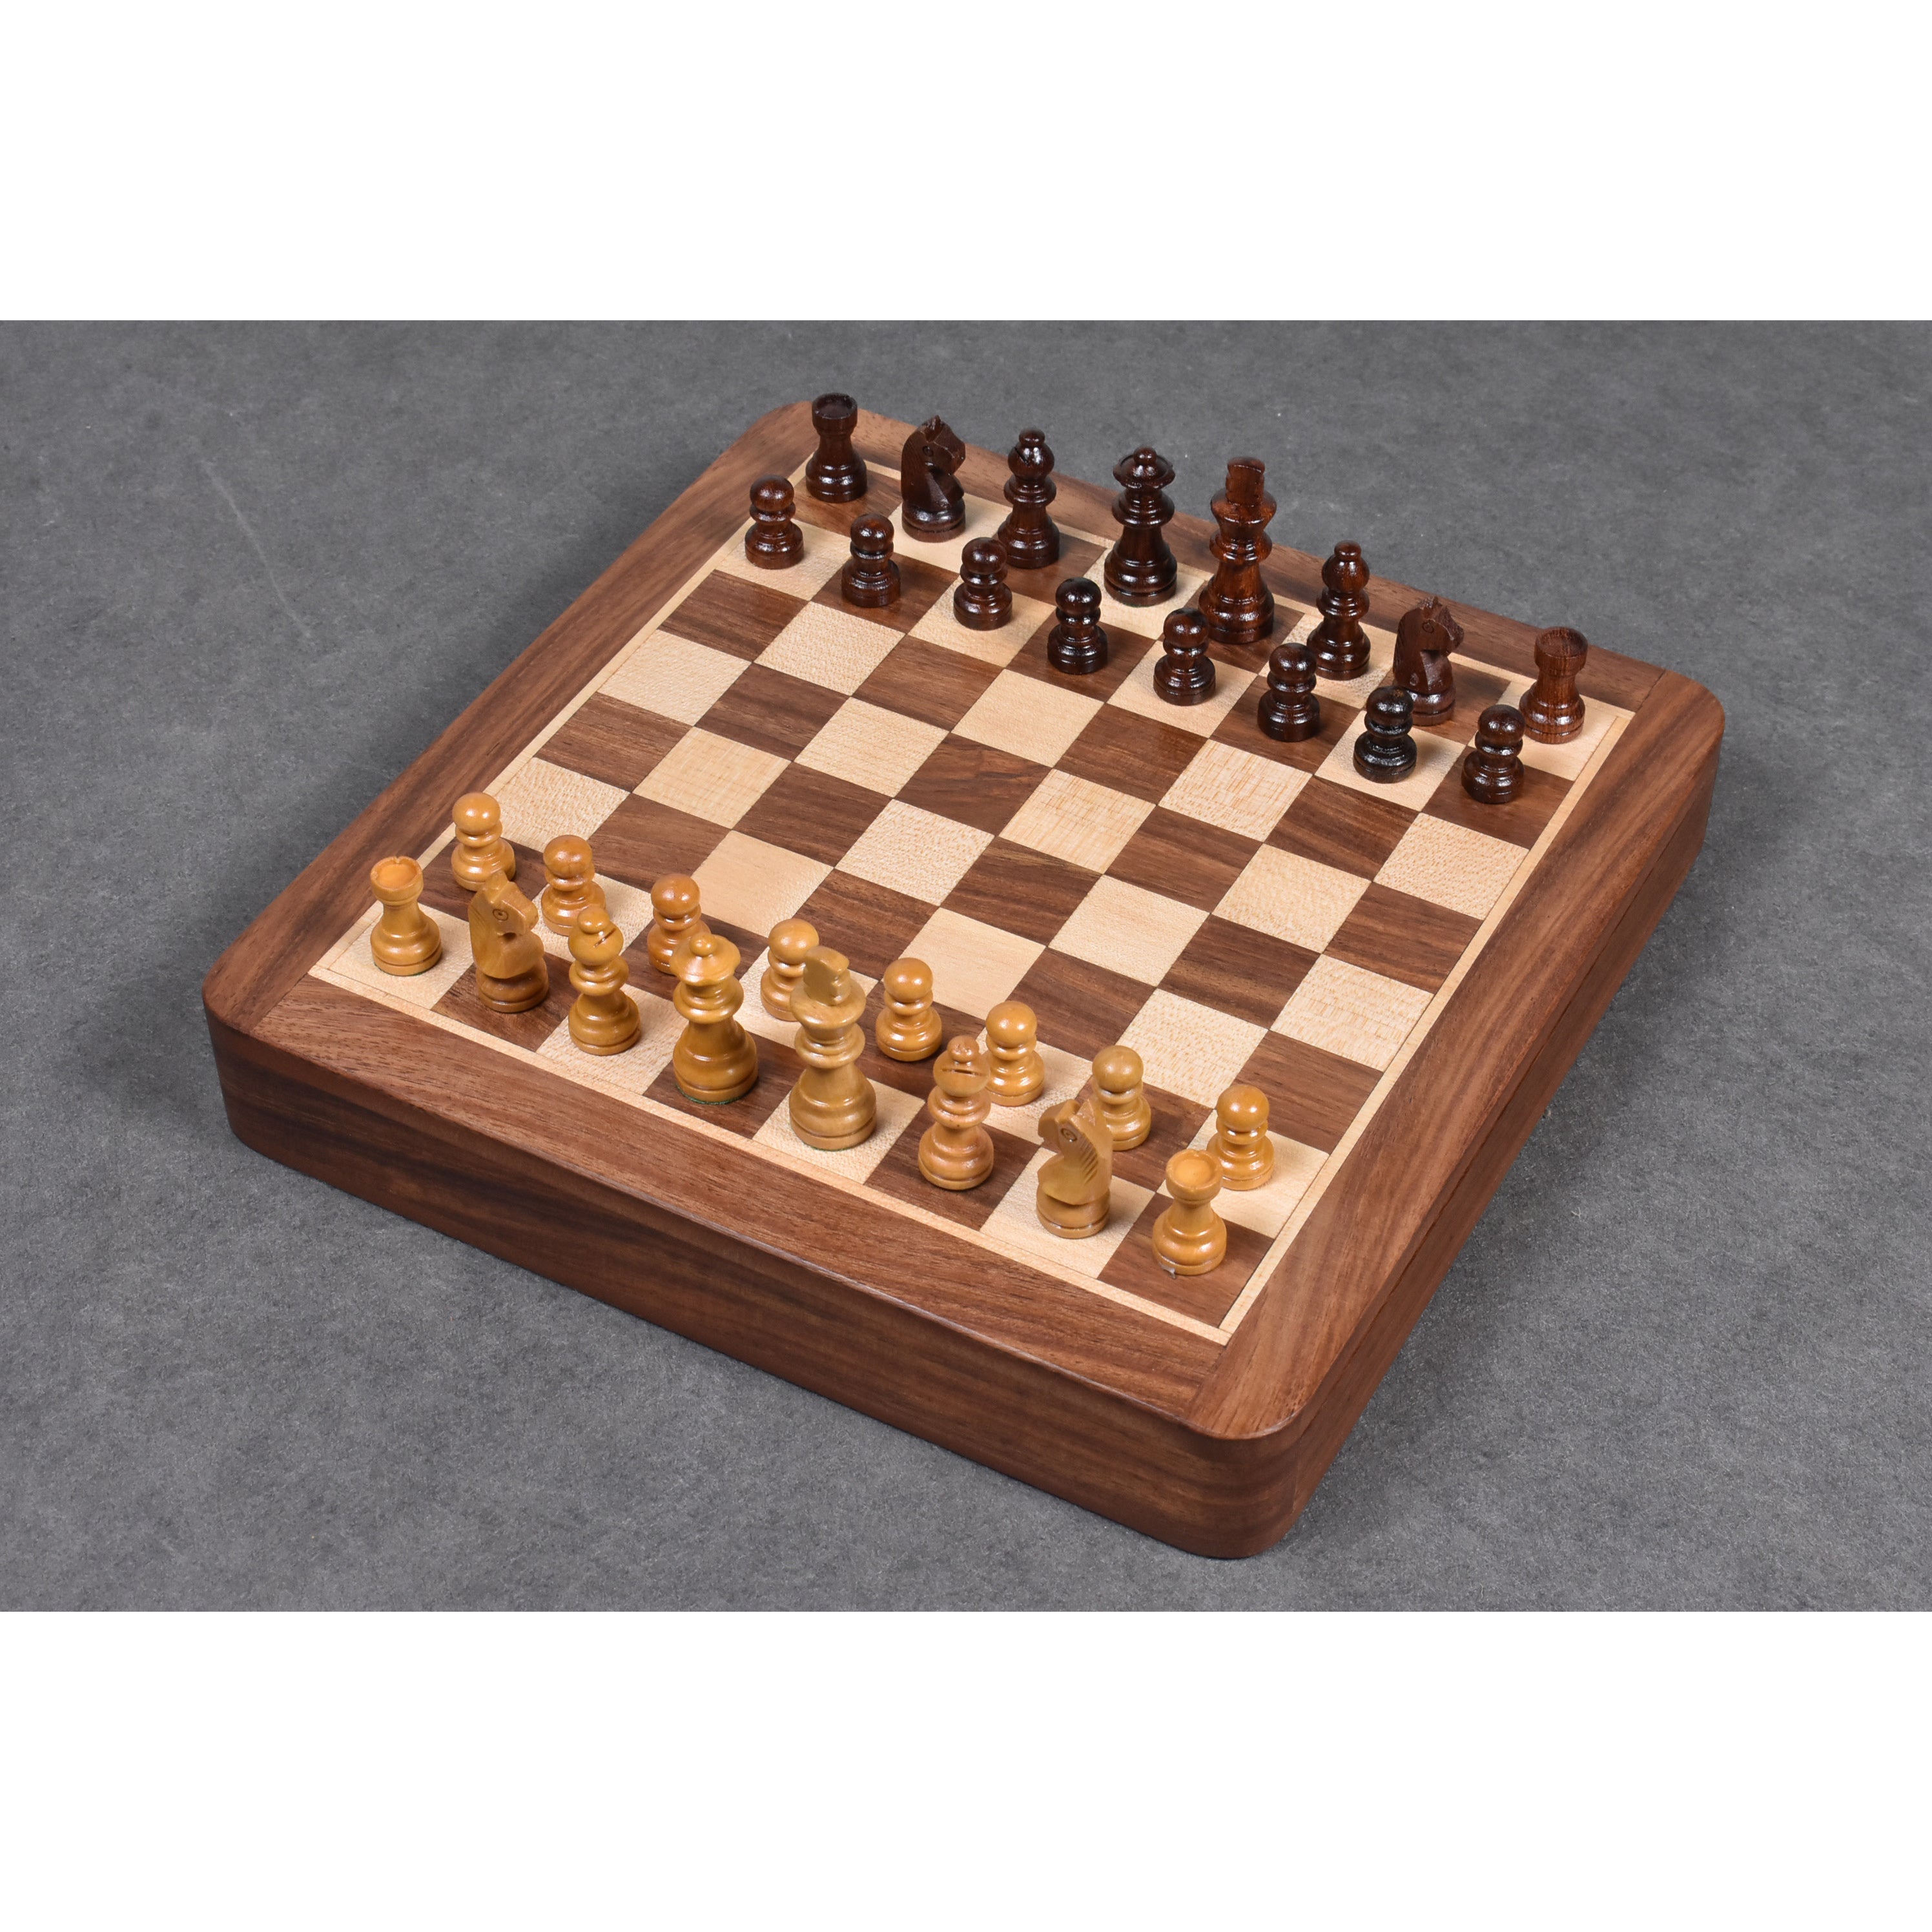 Large 10 inch Travel Chess set with Drawer